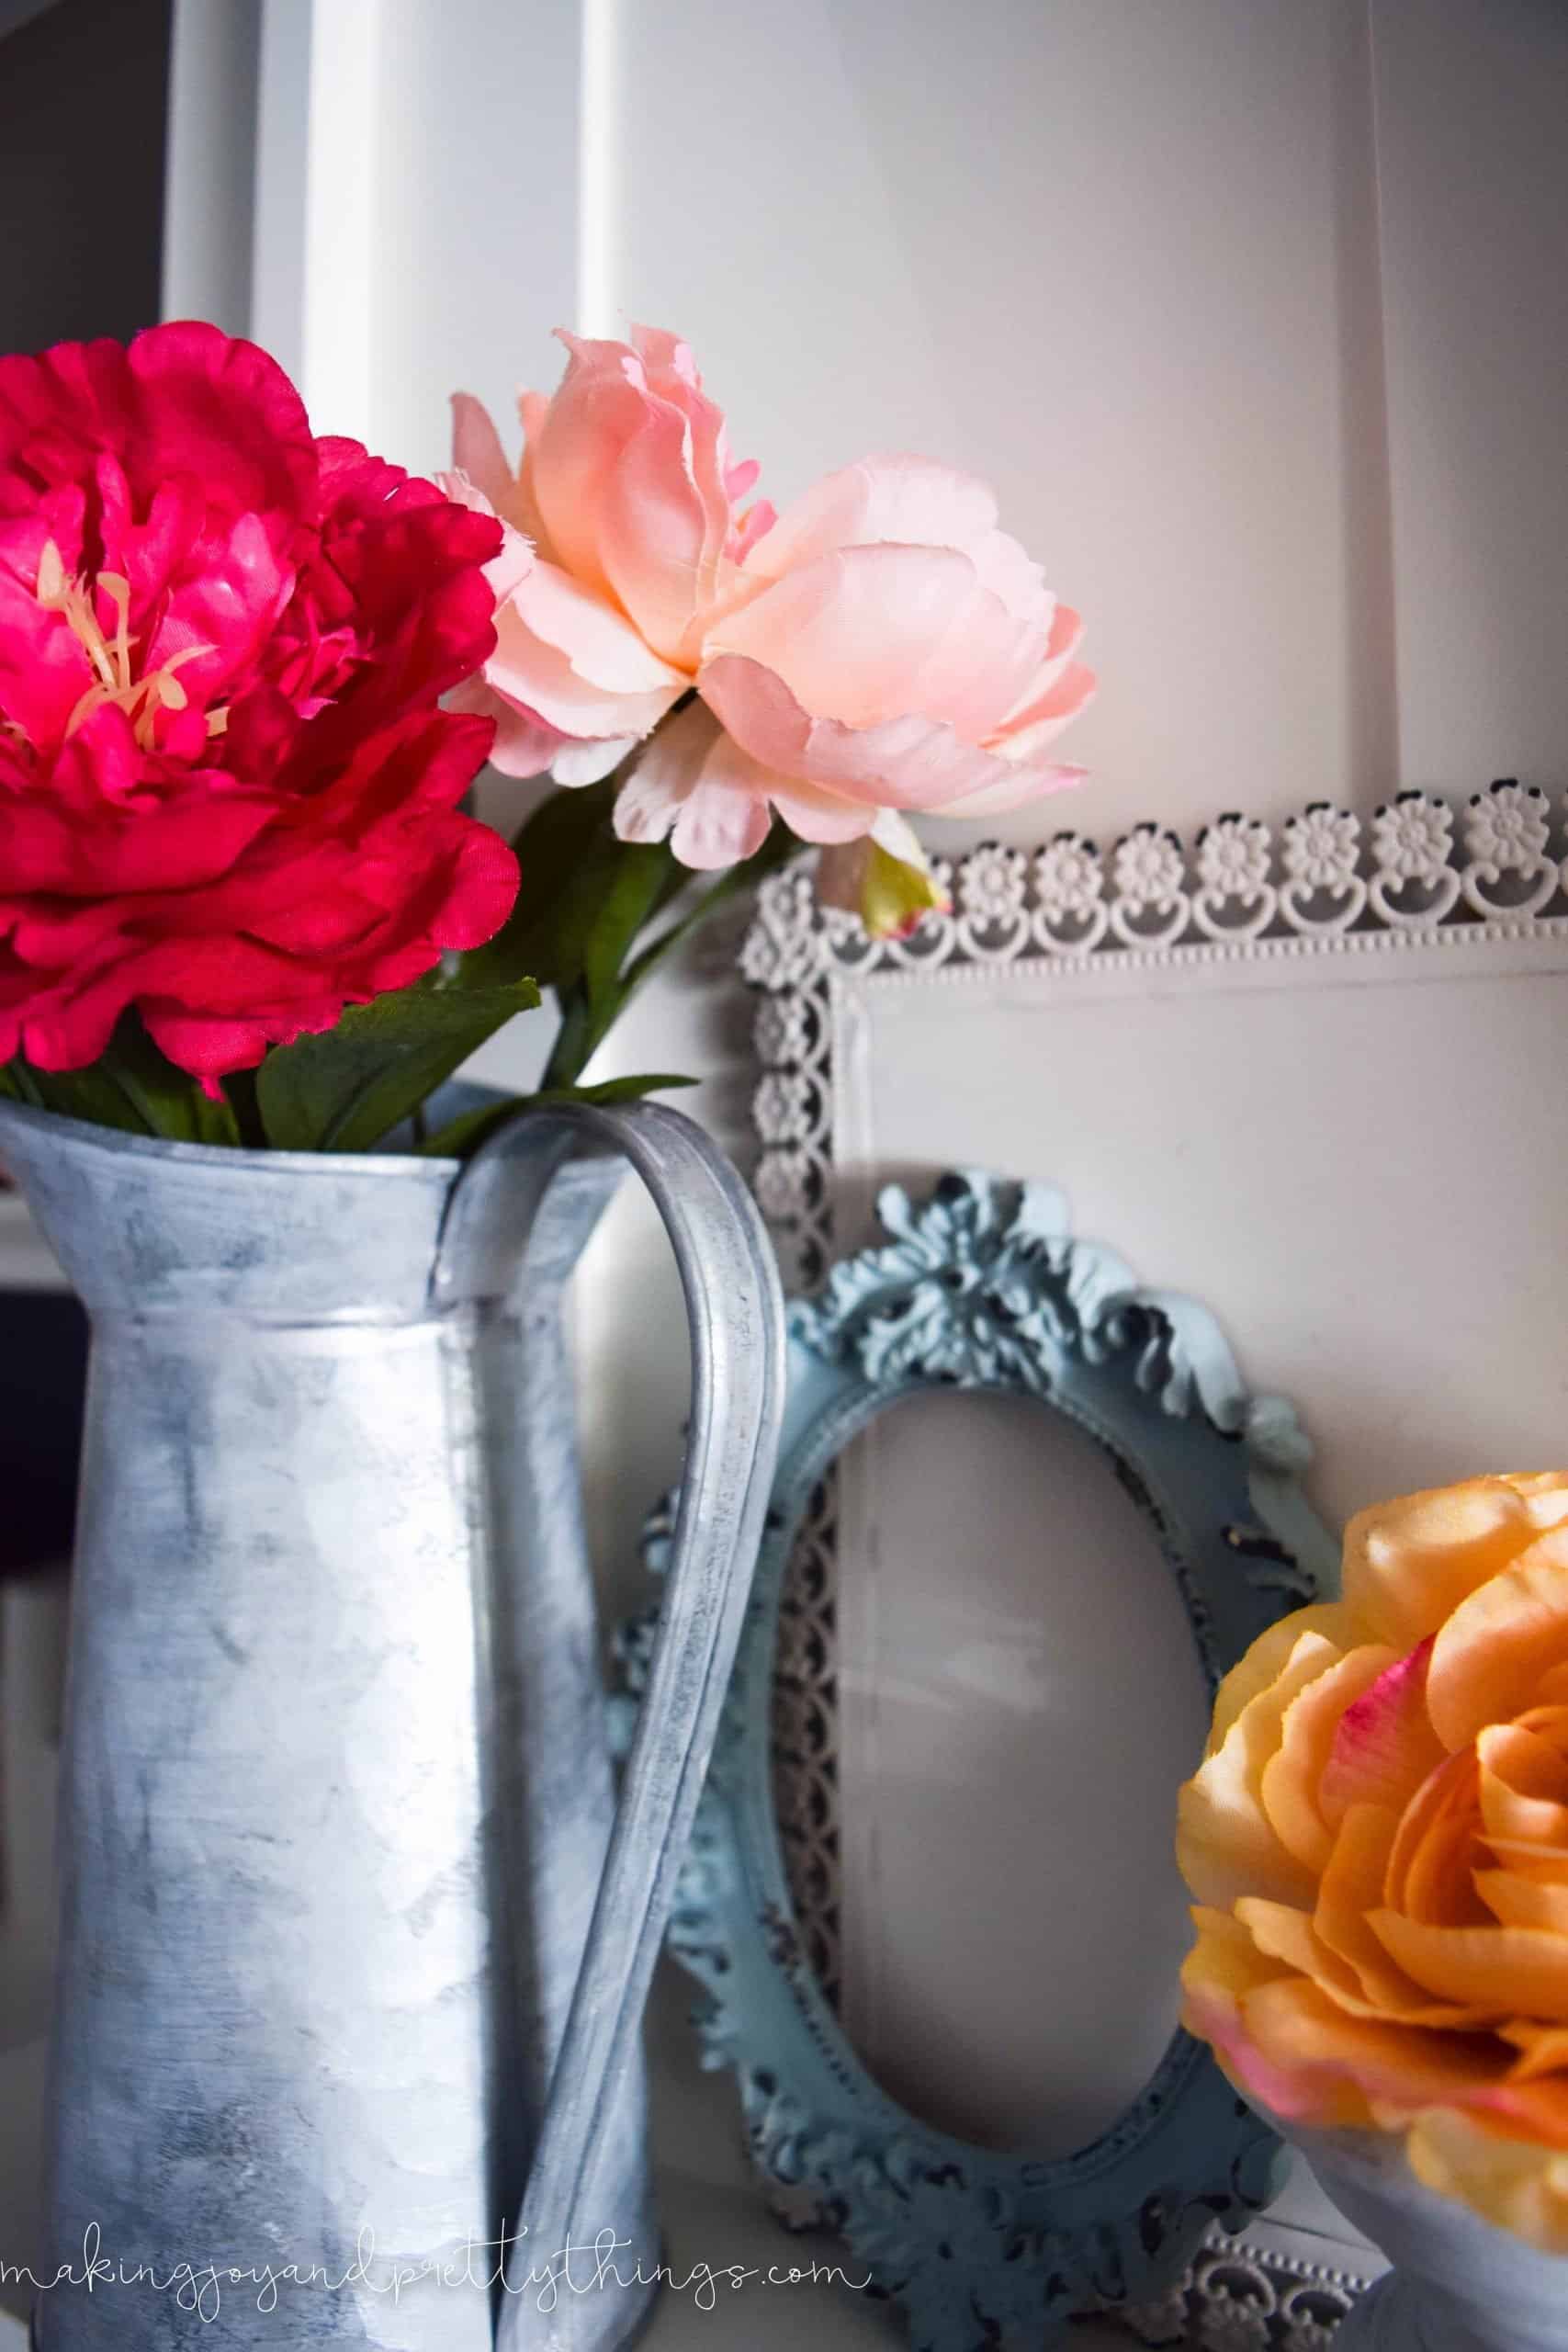 A galvanized metal vase filled with pink and red faux flower stems sits on the white mantle, next to two empty picture frames painted white and blue.